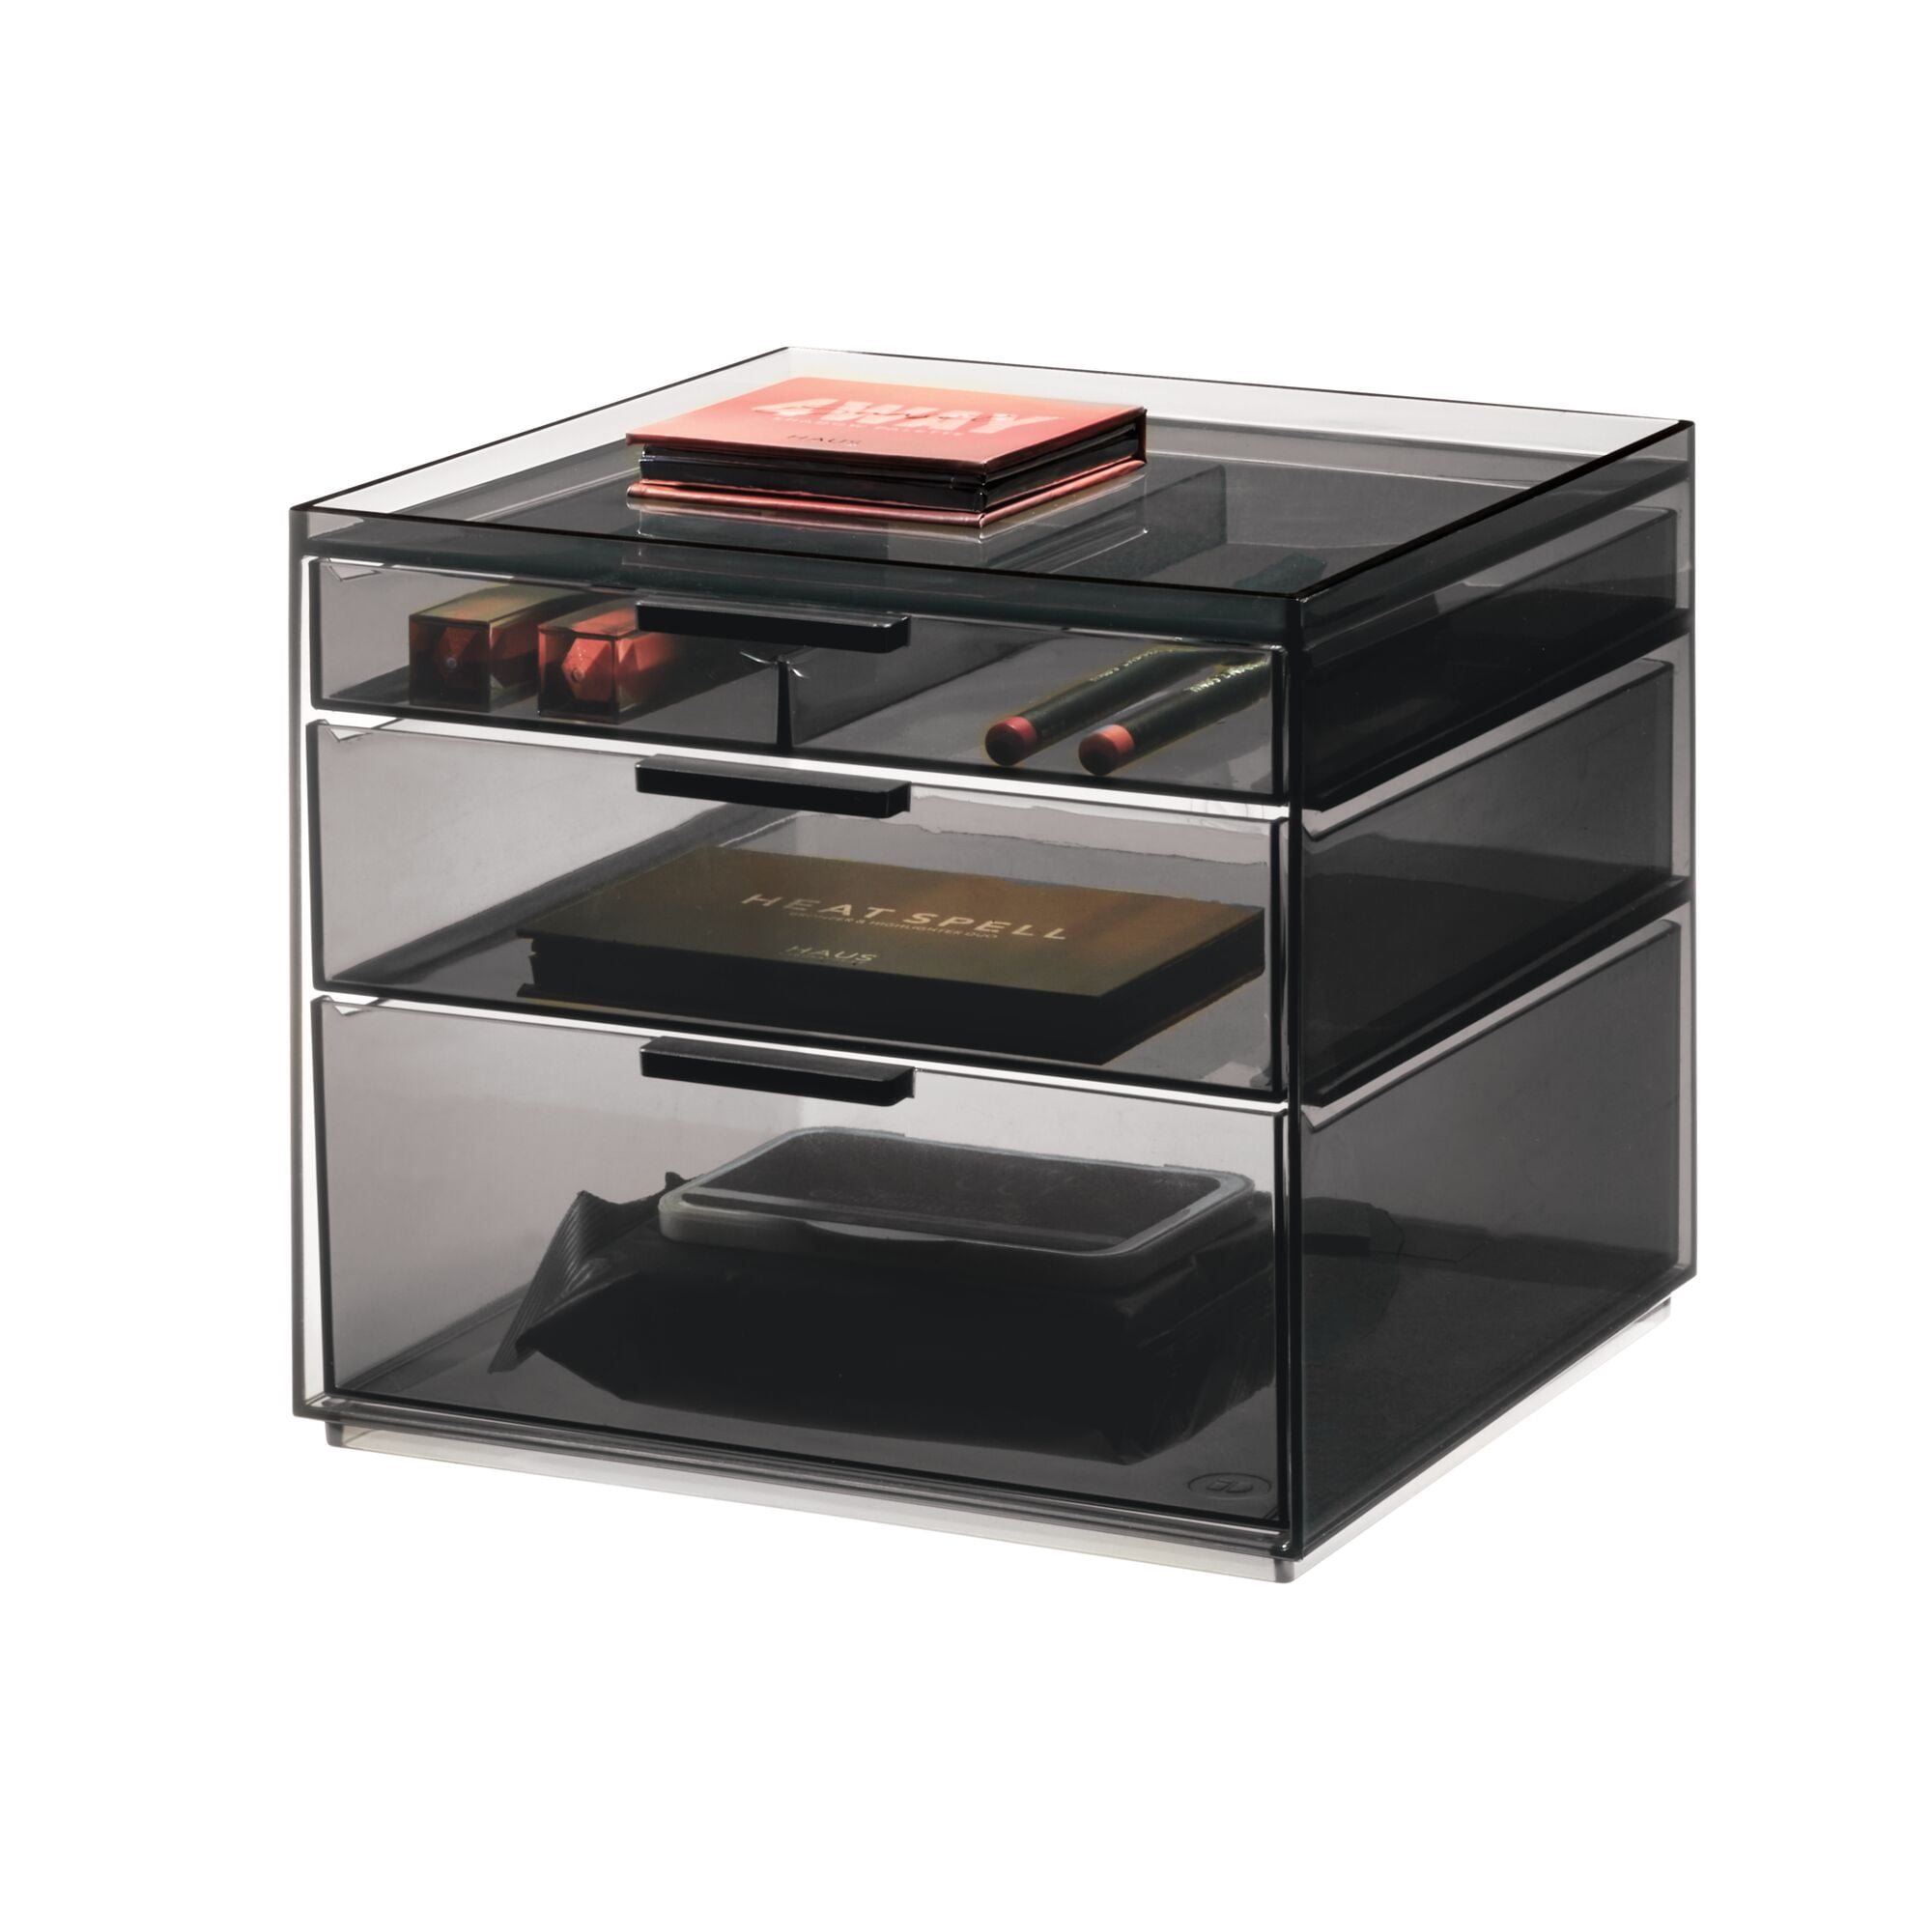 Declutter Your Vanity and Simplify Your Life with iDesign Drawer Organizer  by Sarah Tanno